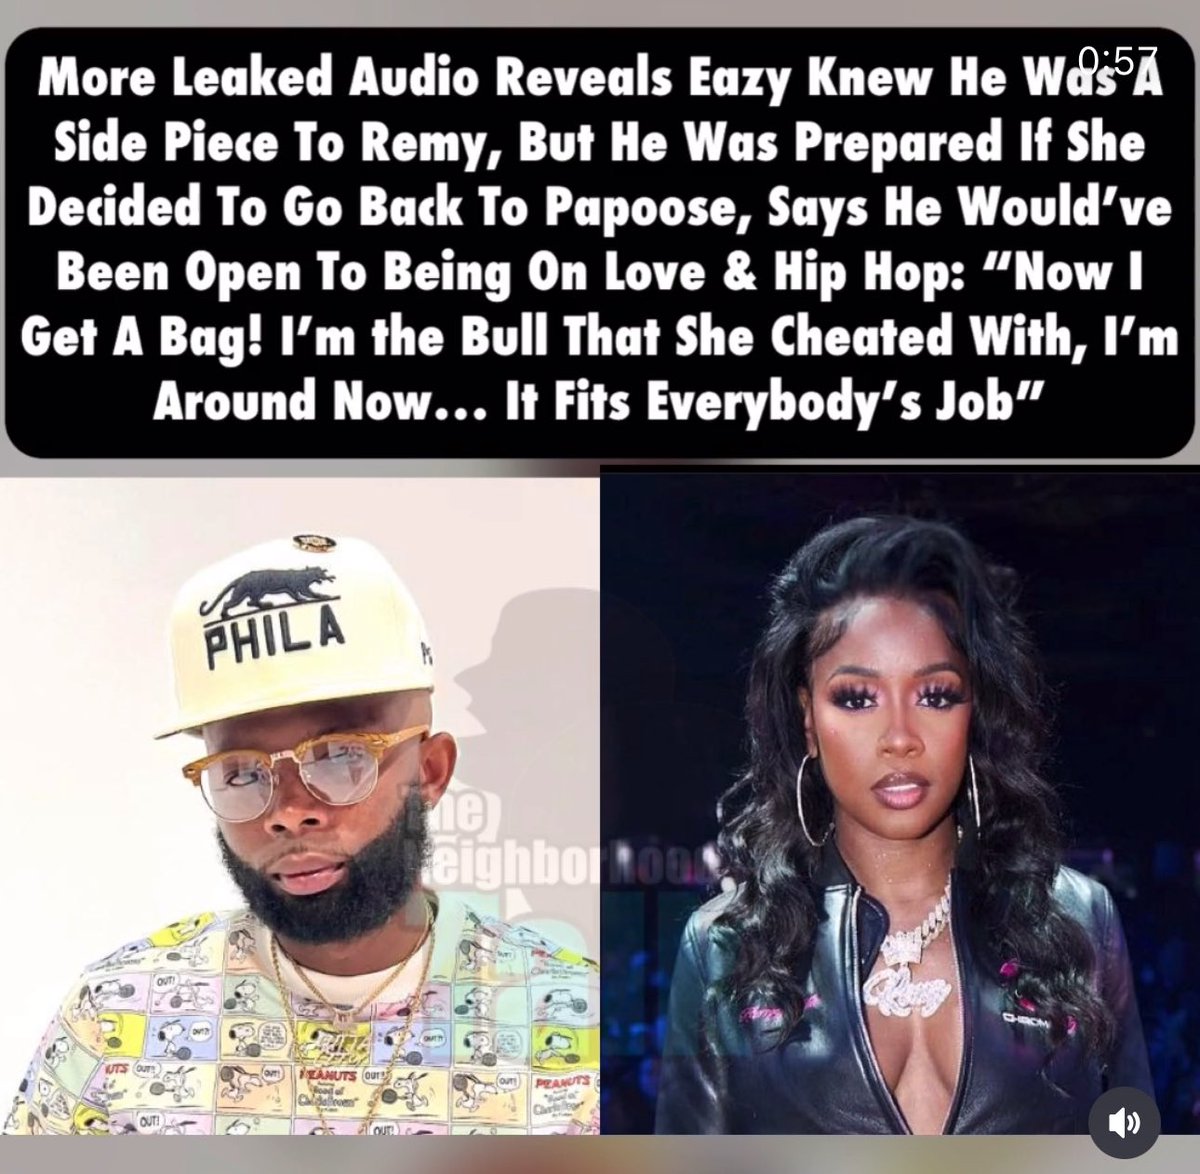 I’m so mad that Remy cheated on a good man like Papoose with a great value version of him. And I can’t believe she’s out here with a man that doesn’t have enough chin for his beard. I’m flabbergasted. #remyma #papoose #eazytheblockcaptain #loveandhiphop